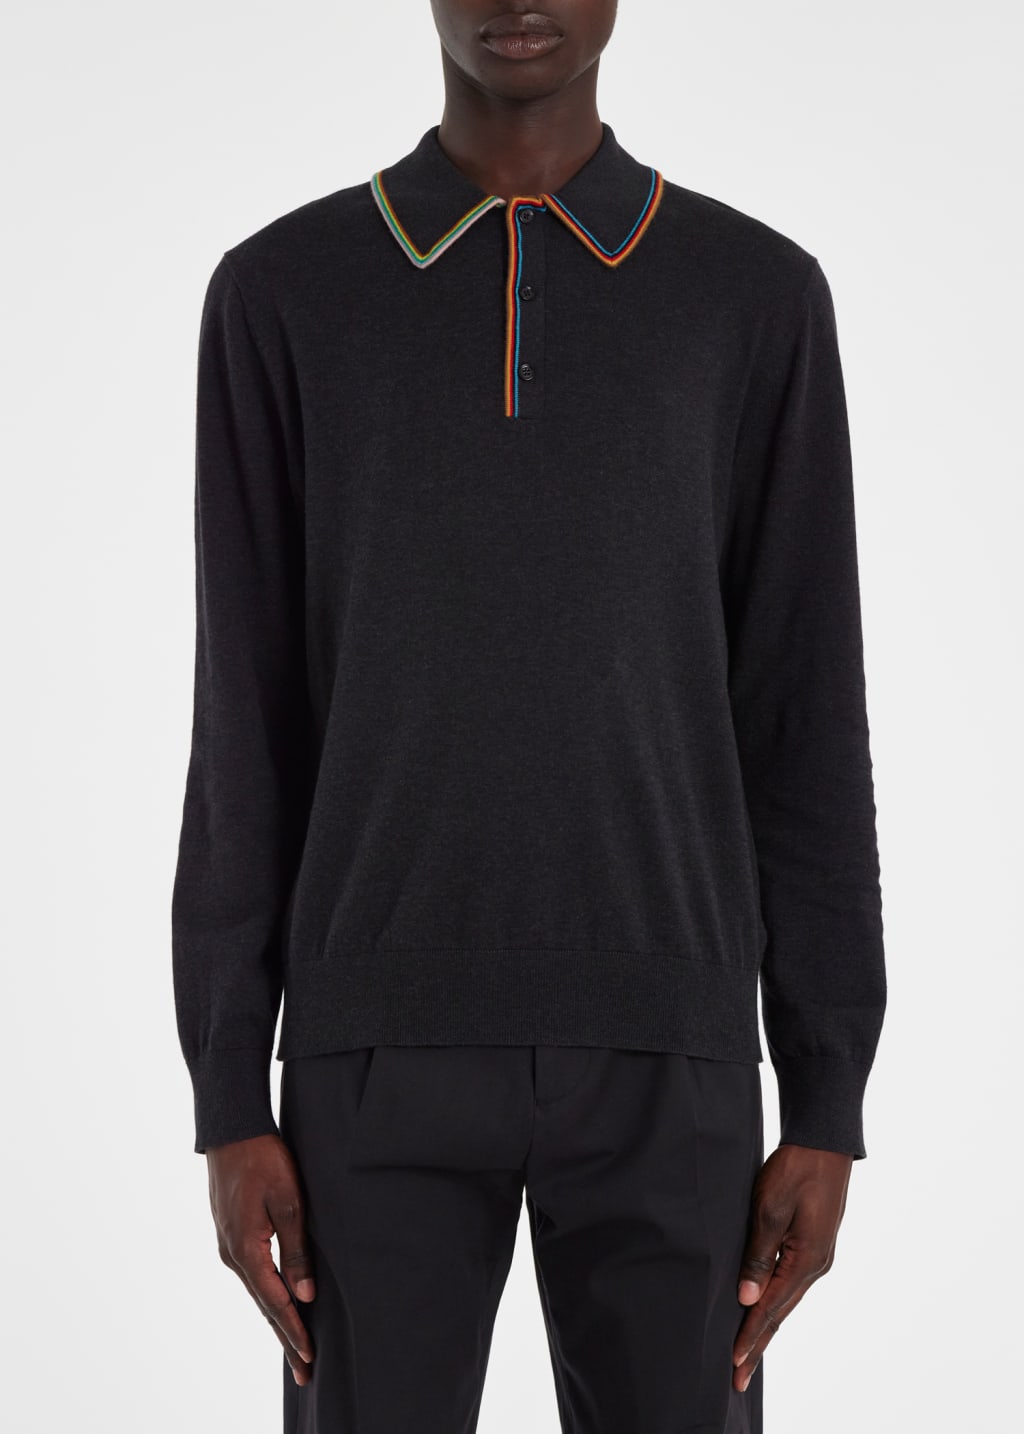 Front Model View - 'Signature Stripe' Long-Sleeve Polo Shirt Paul Smith